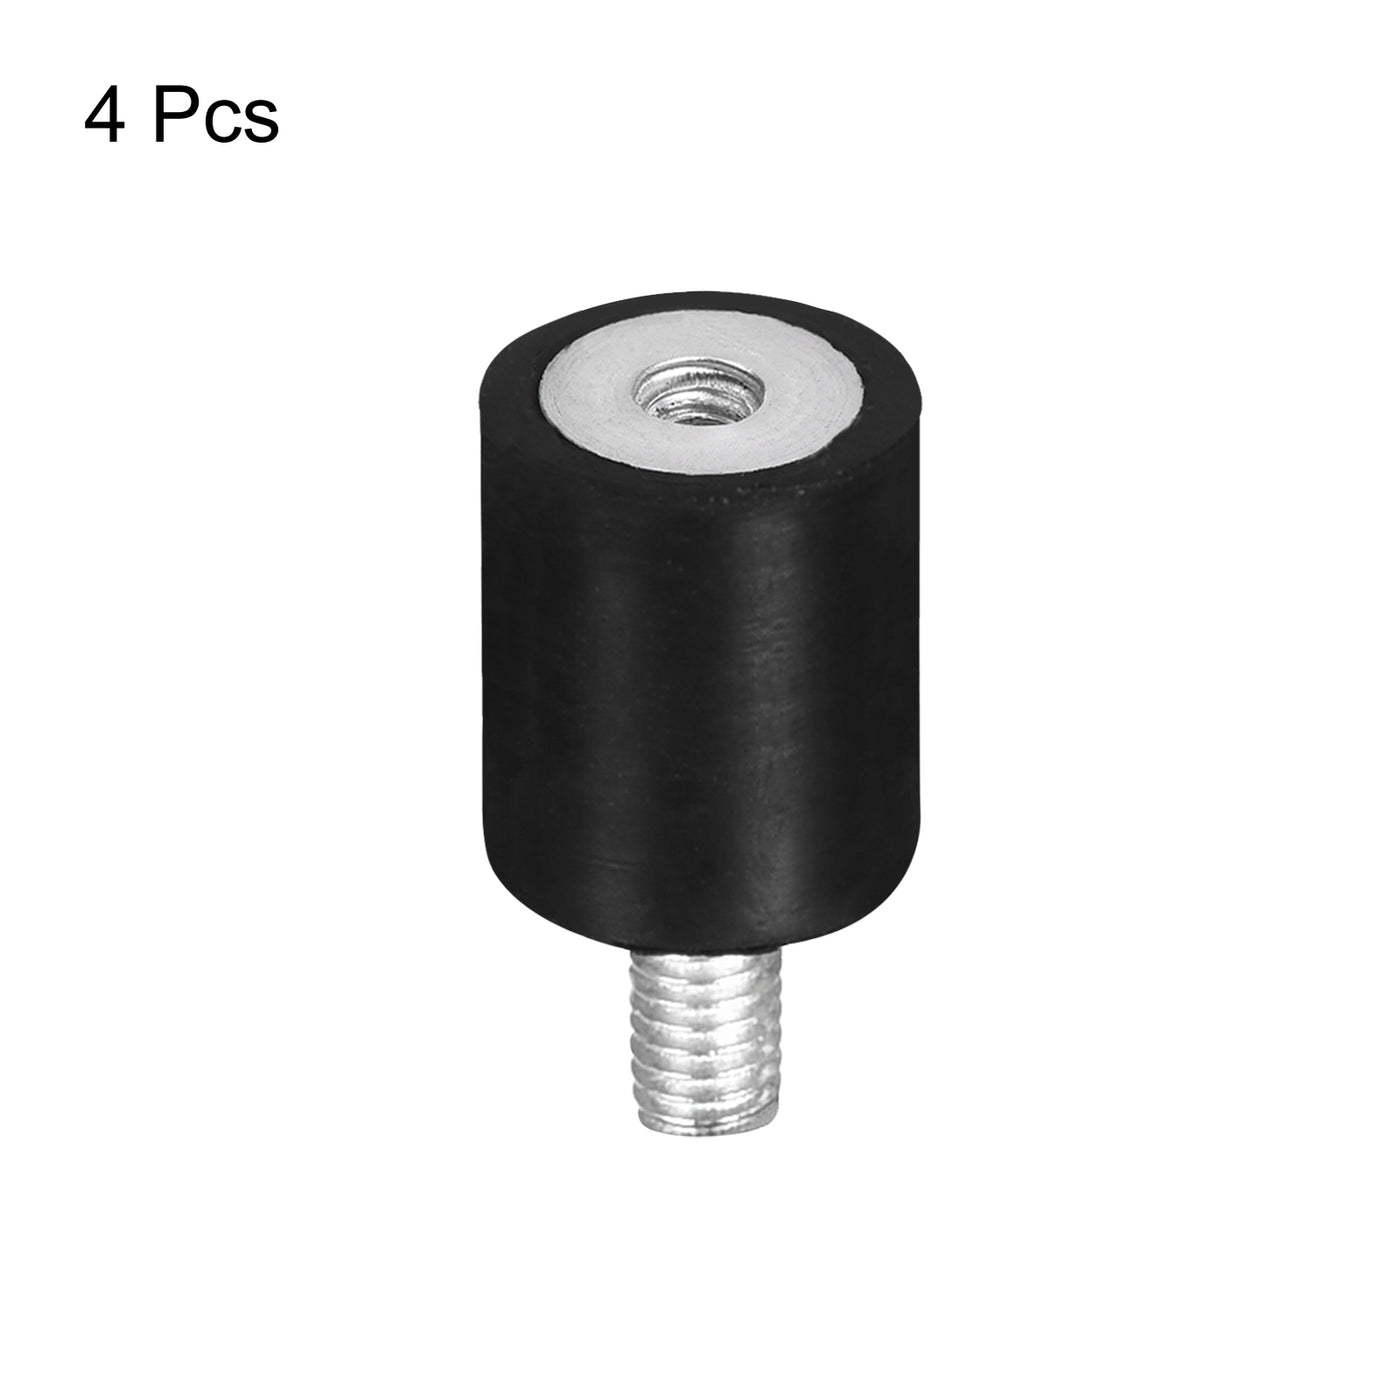 uxcell Uxcell Rubber Mounts 4pcs M4 Male/Female Vibration Isolator Shock Absorber D15mmxH20mm